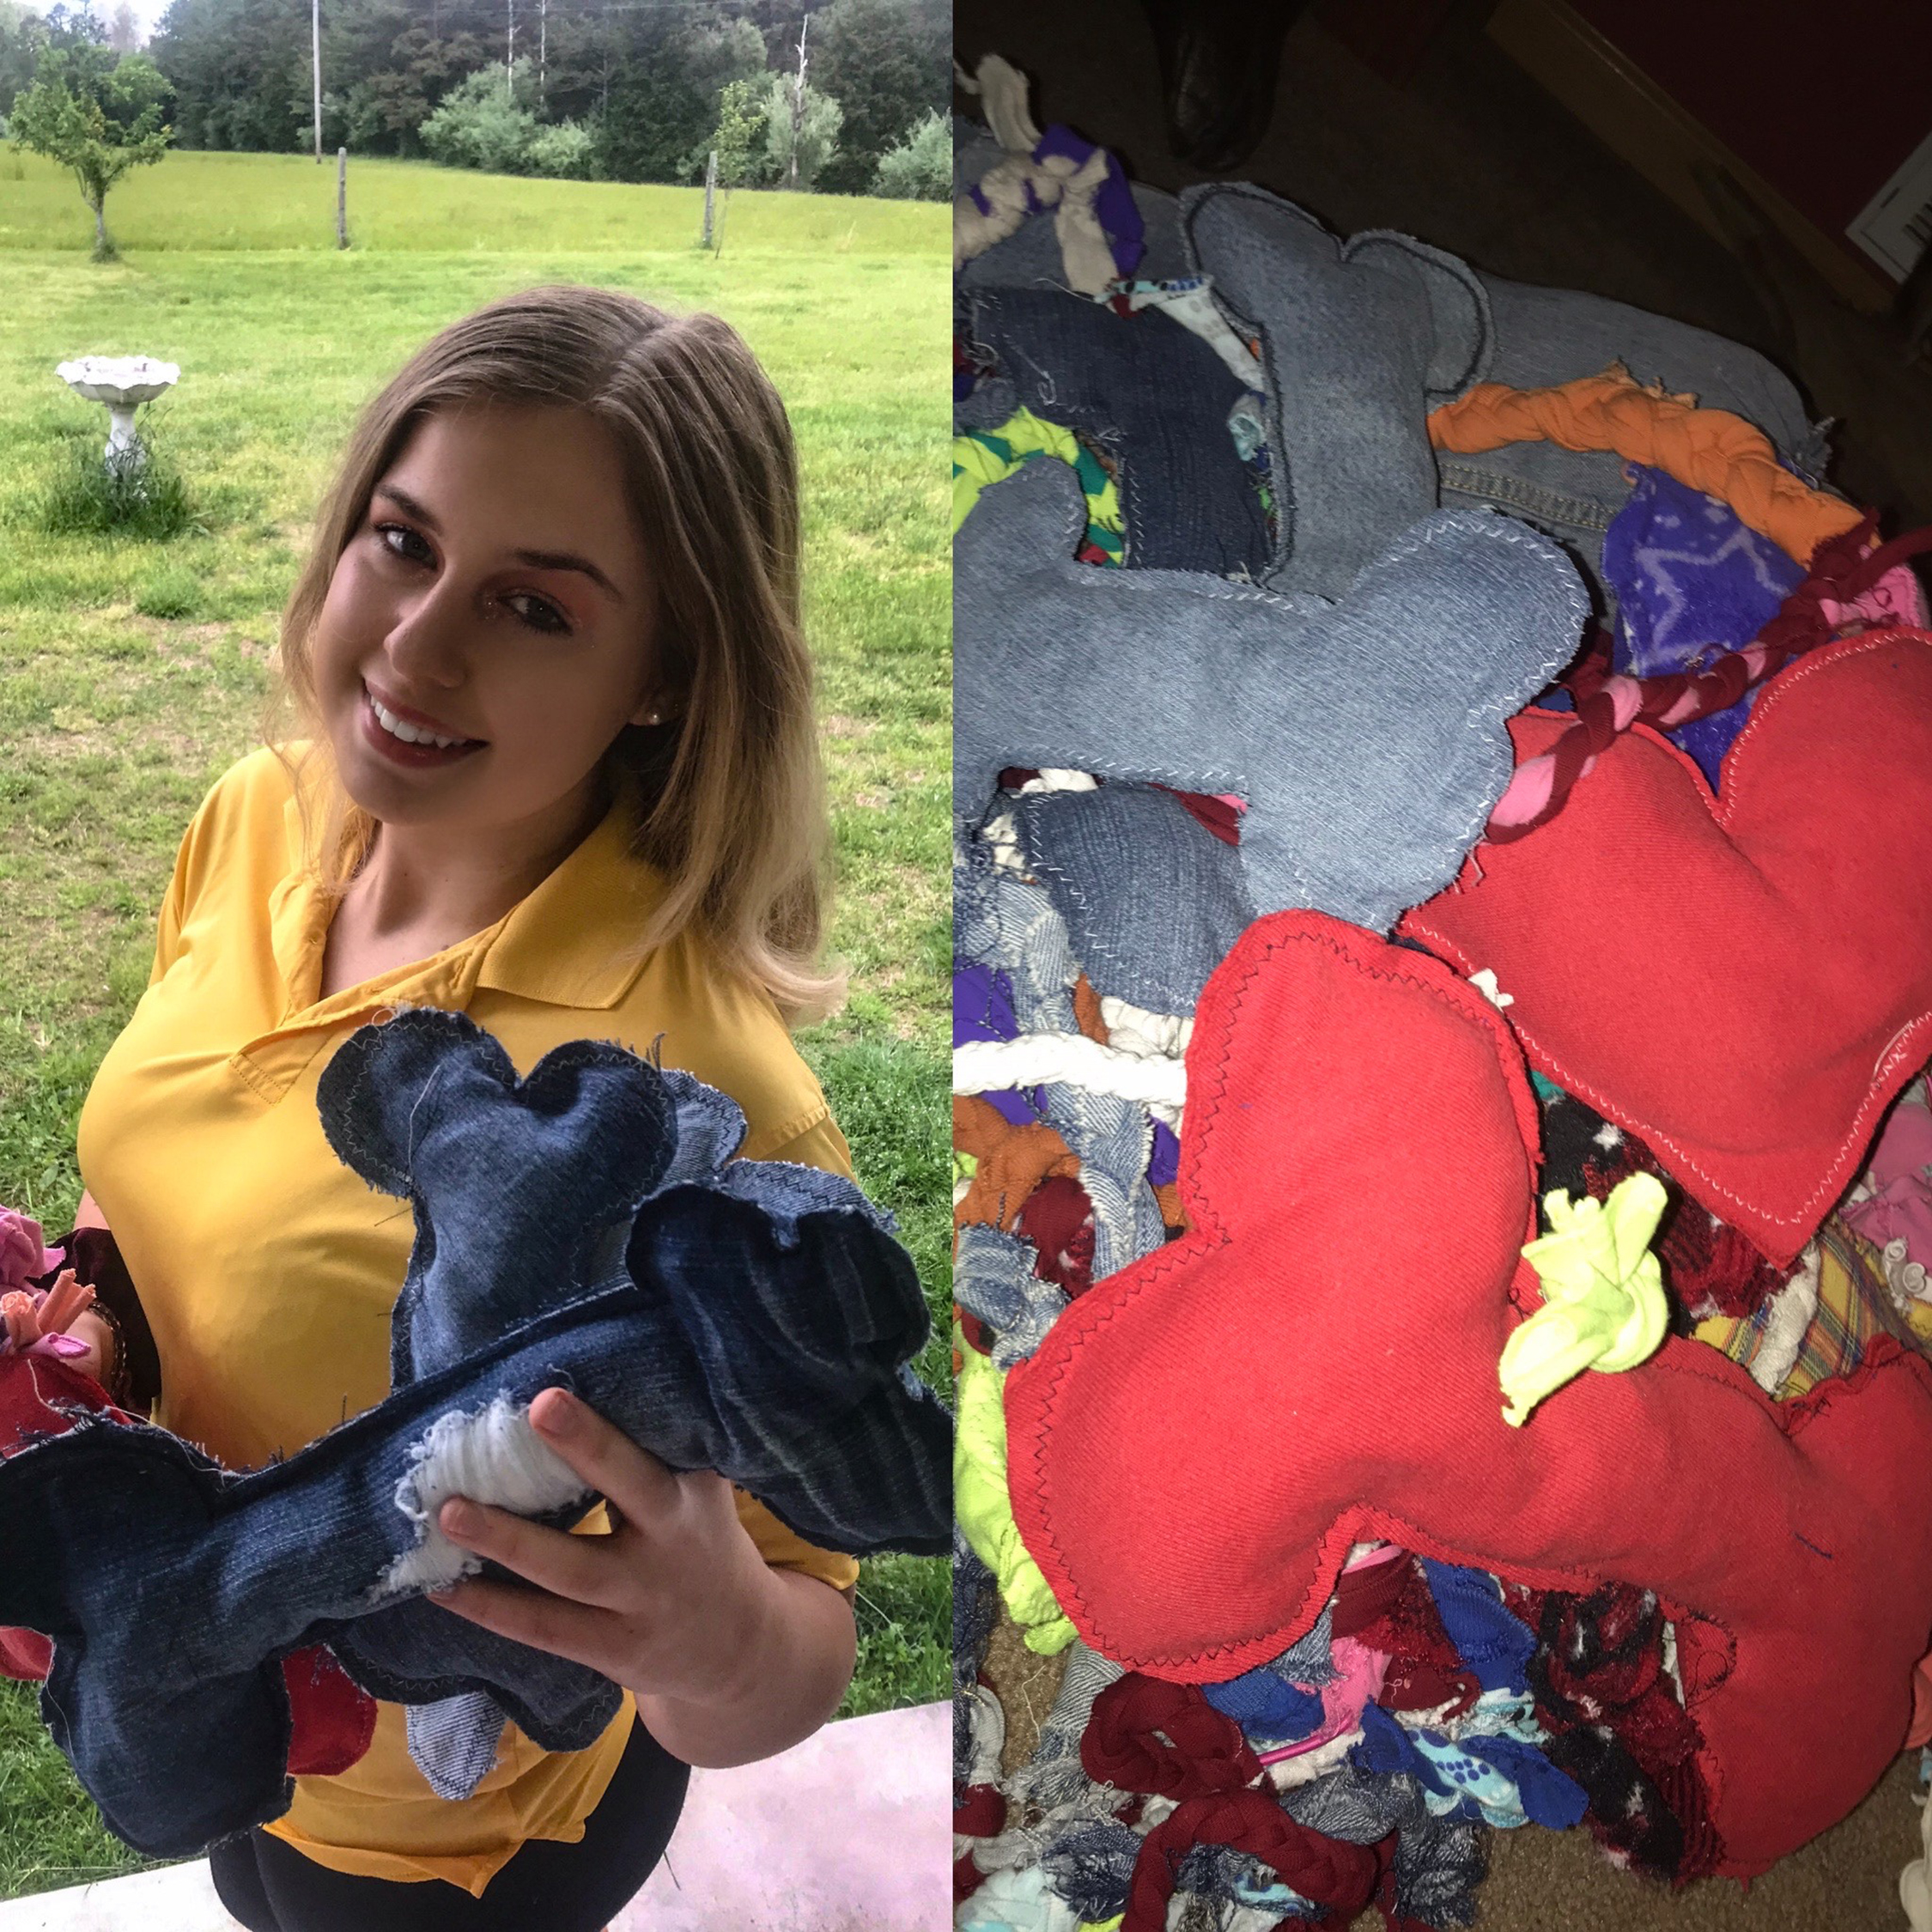 2019 Rogers Scholar Shelbie Black uses recycled materials to make pet toys  for animal shelter | Youth Programs at The Center for Rural Development